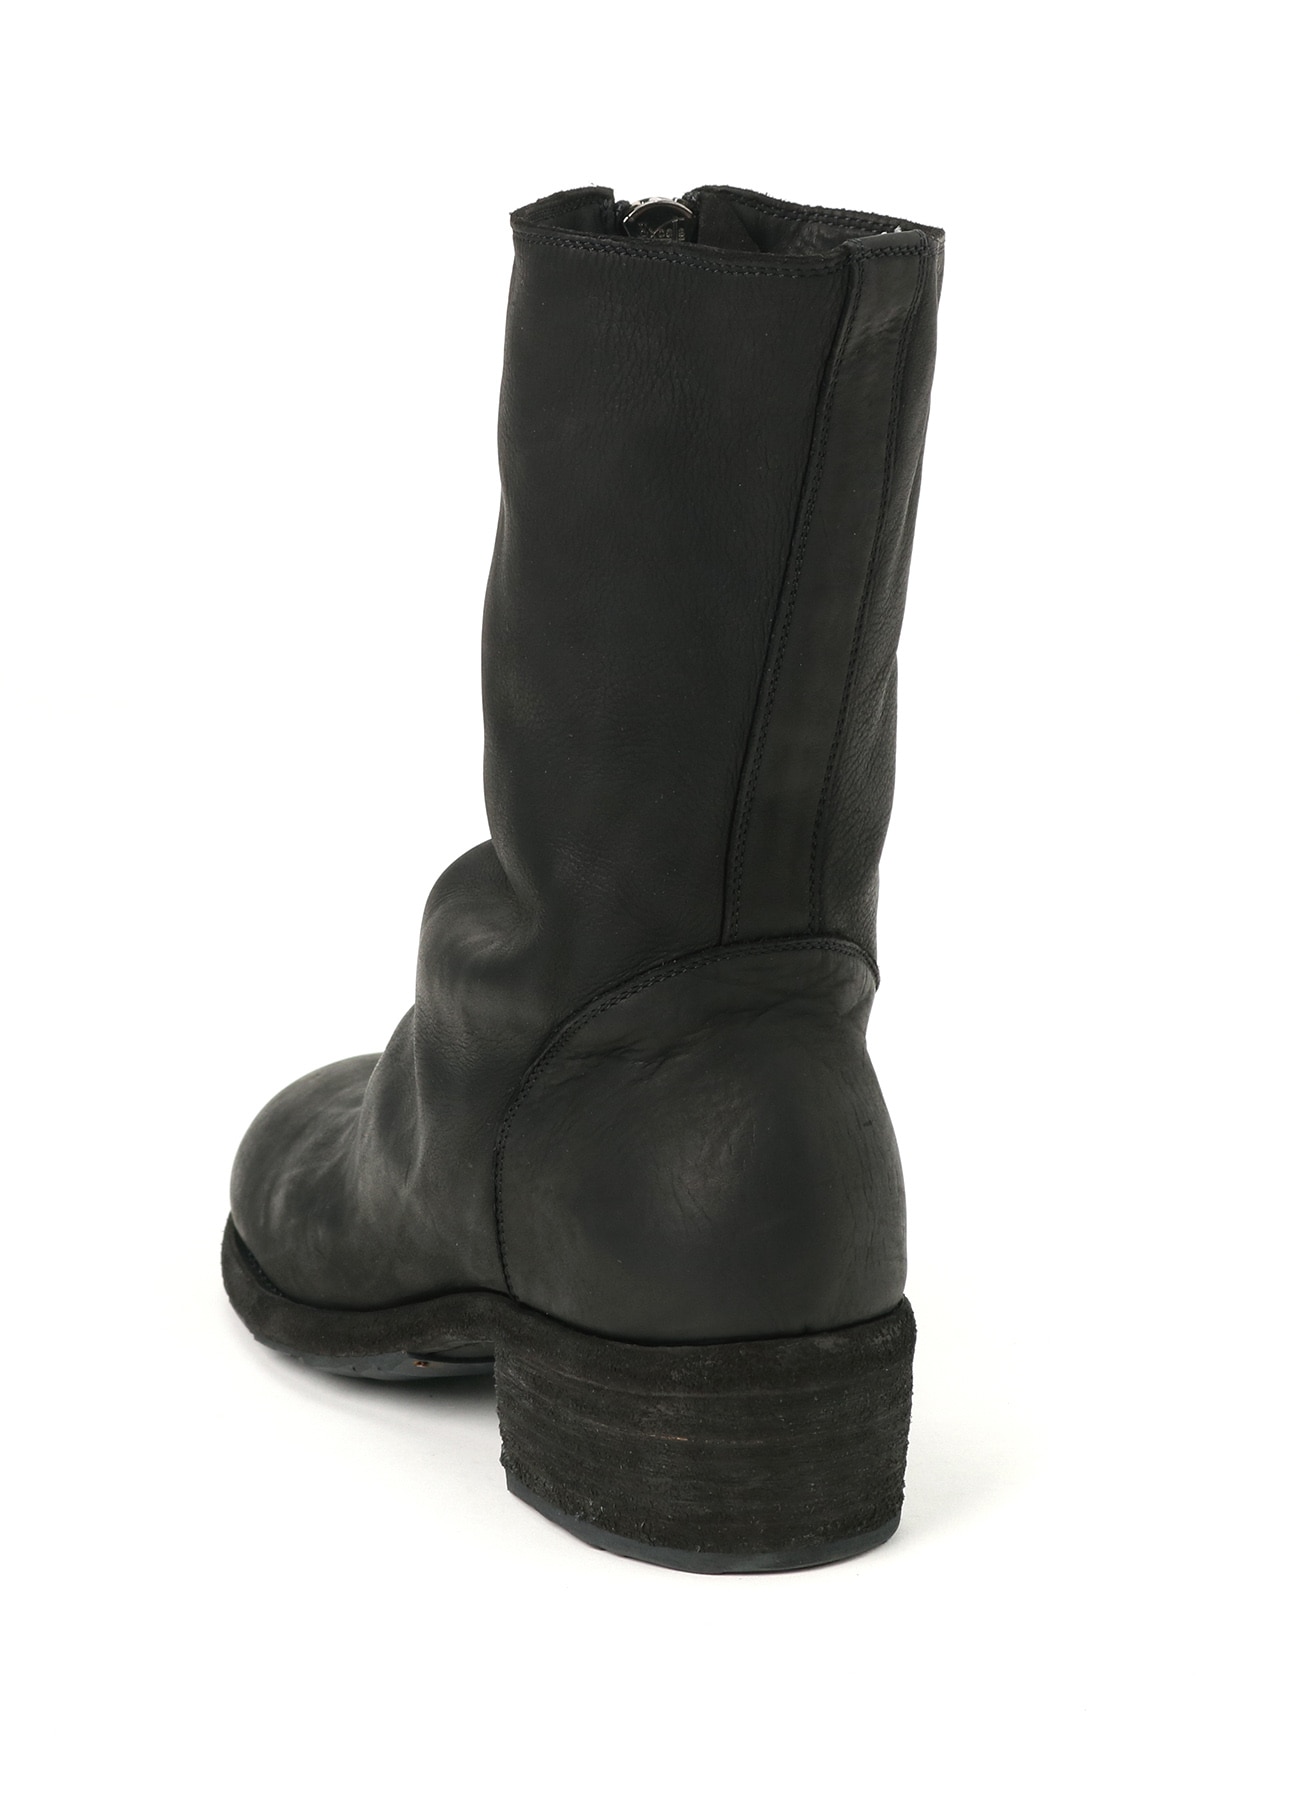 SOFT CALF LEATHER FRONT ZIPPER BOOTS